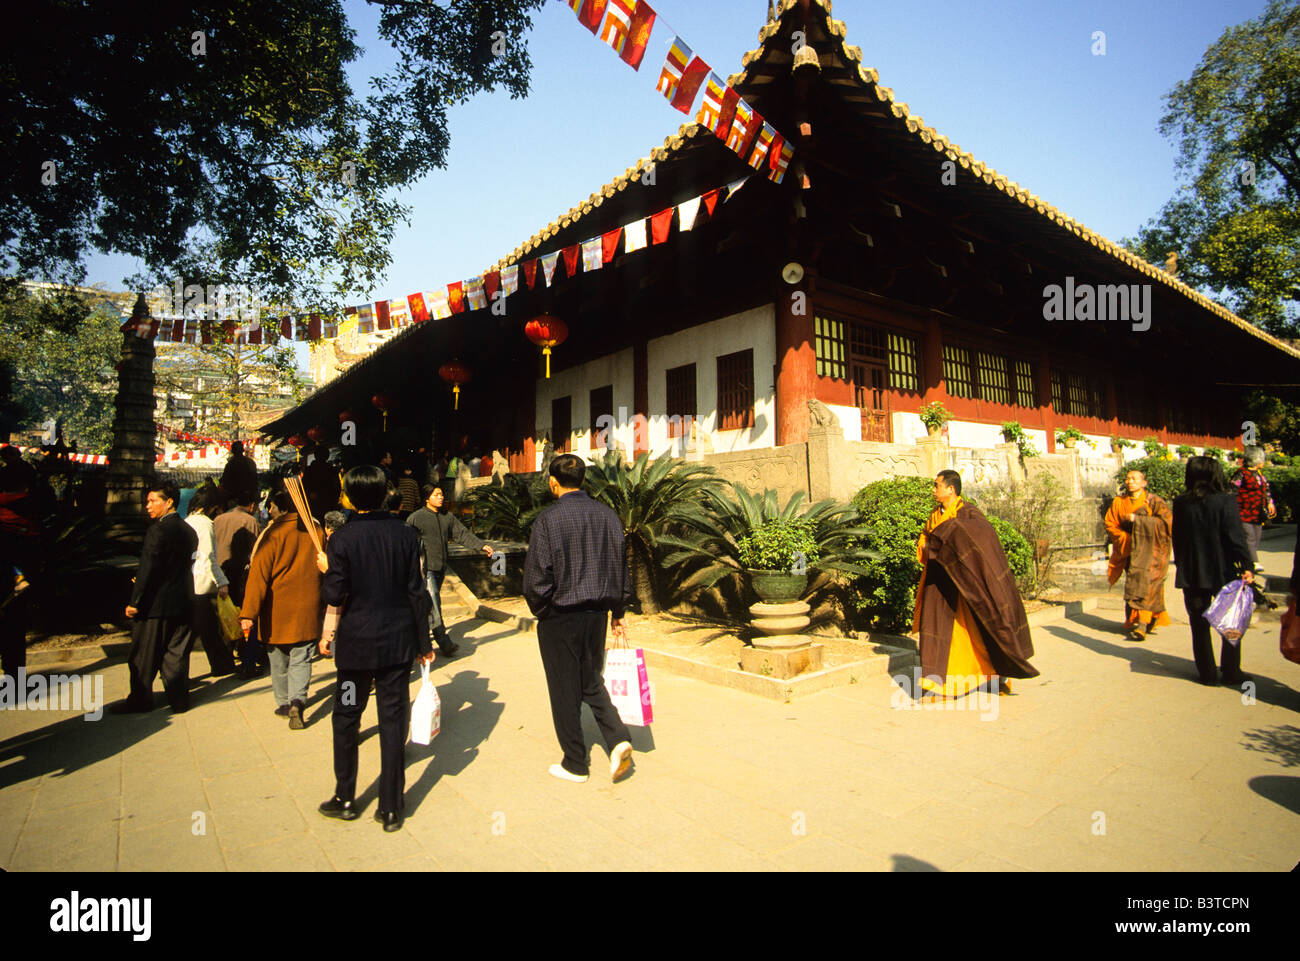 Temple of Bright Filial Piety in Guangzhou People's Republic of China Stock Photo